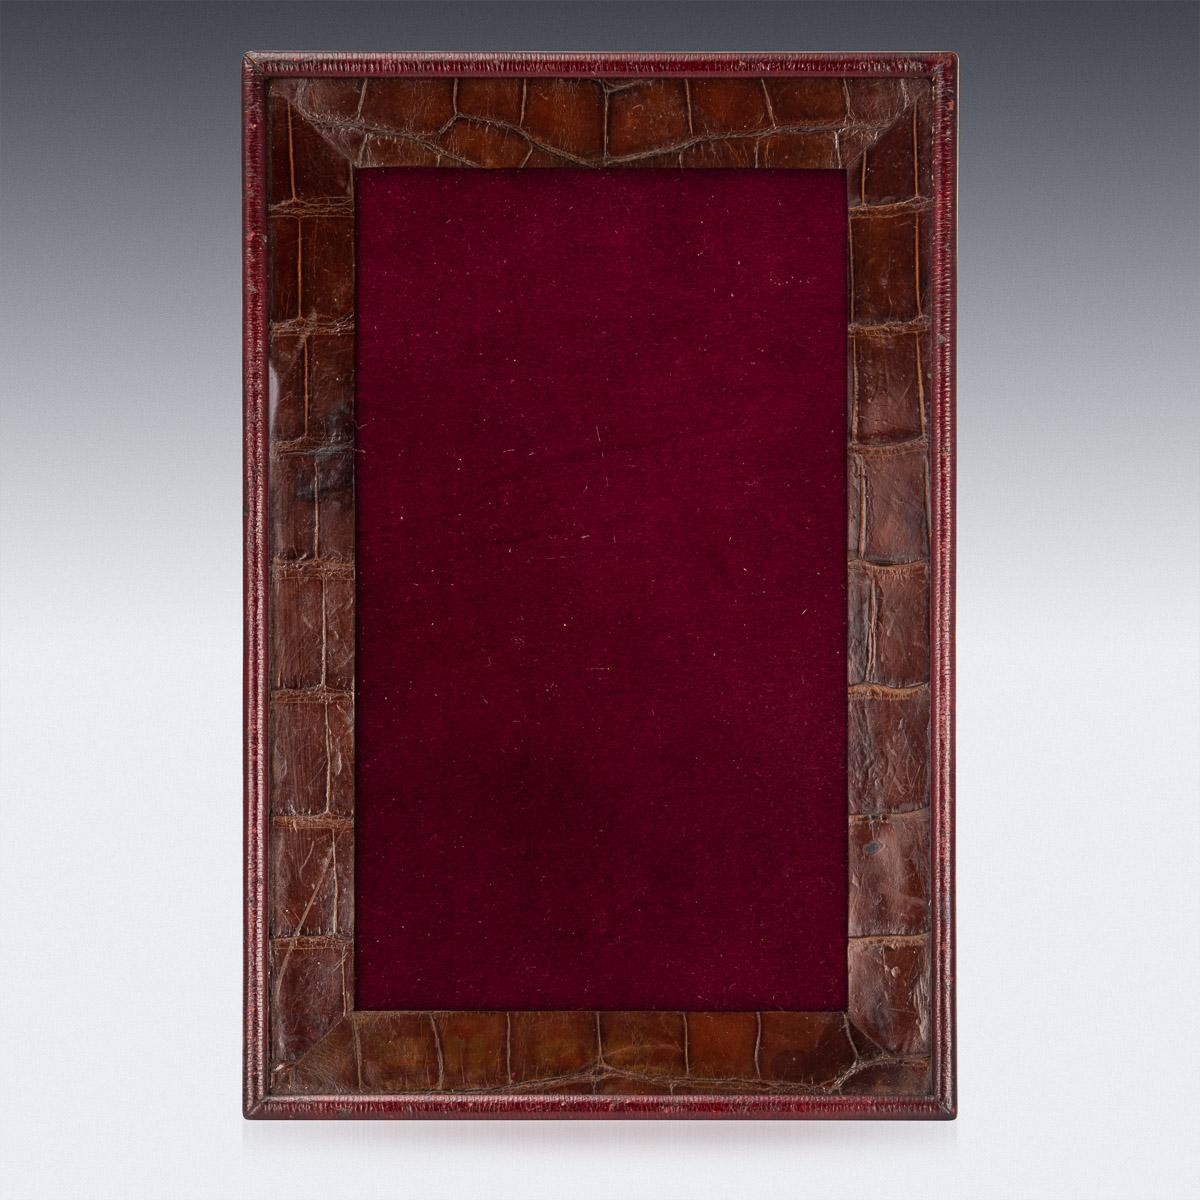 Stylish early-20th century British made sumptuous crocodile leather photograph frame, of rectangular form, covered behind glass and on a strut support. Made and Retailed by Lockwood & Co, 75 New Bond st, London. A really manly statement piece and a